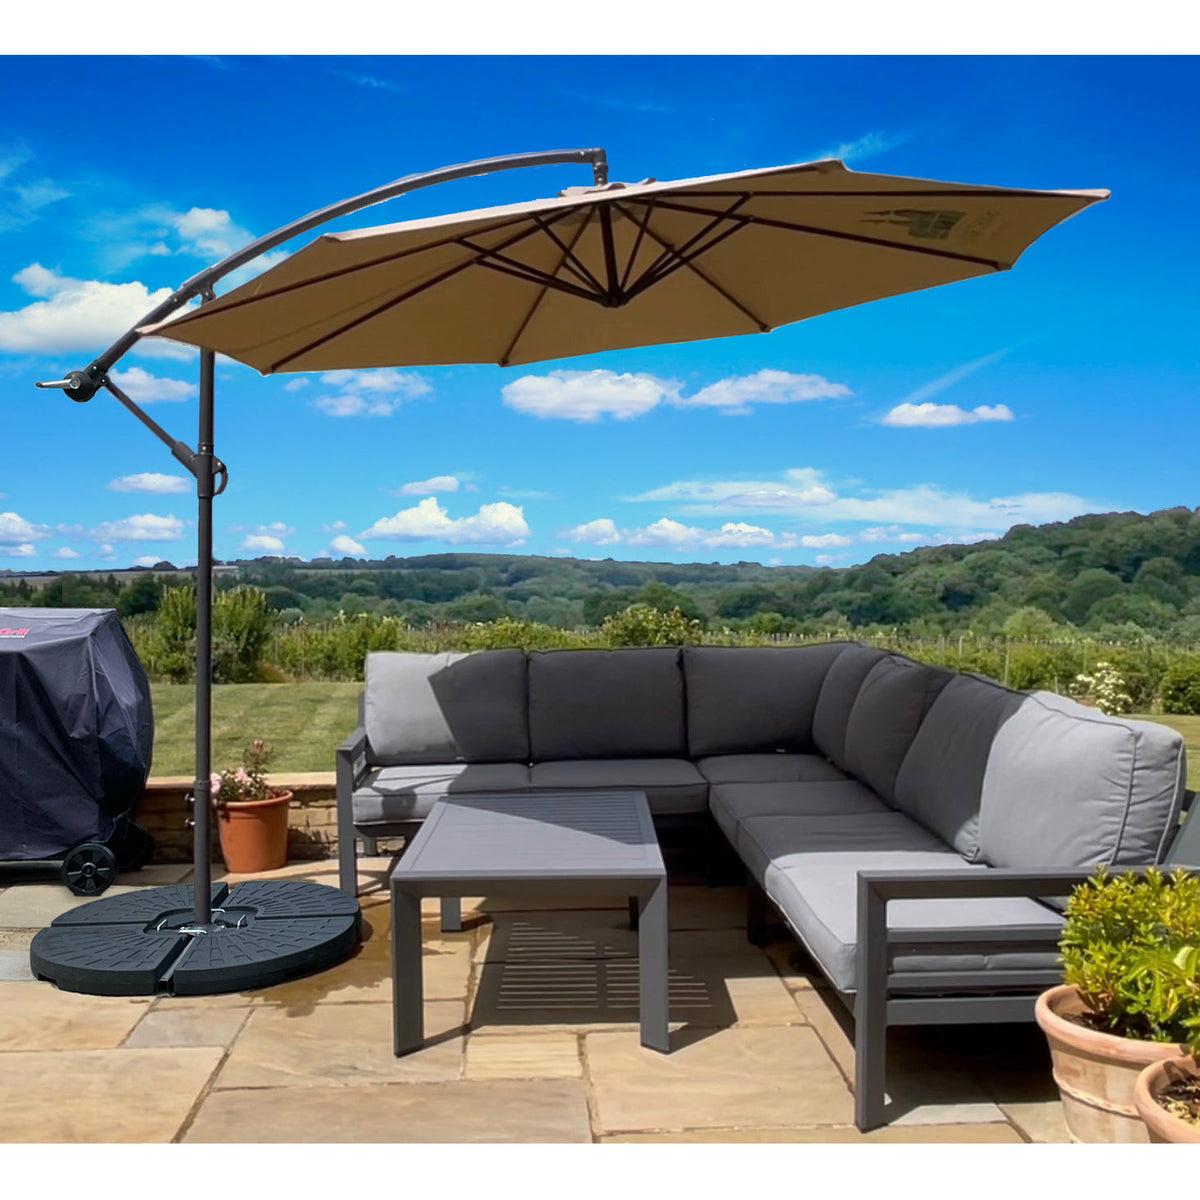 Large 3m (10ft) Lightweight Cantilever Patio Umbrella with 360 Rotation